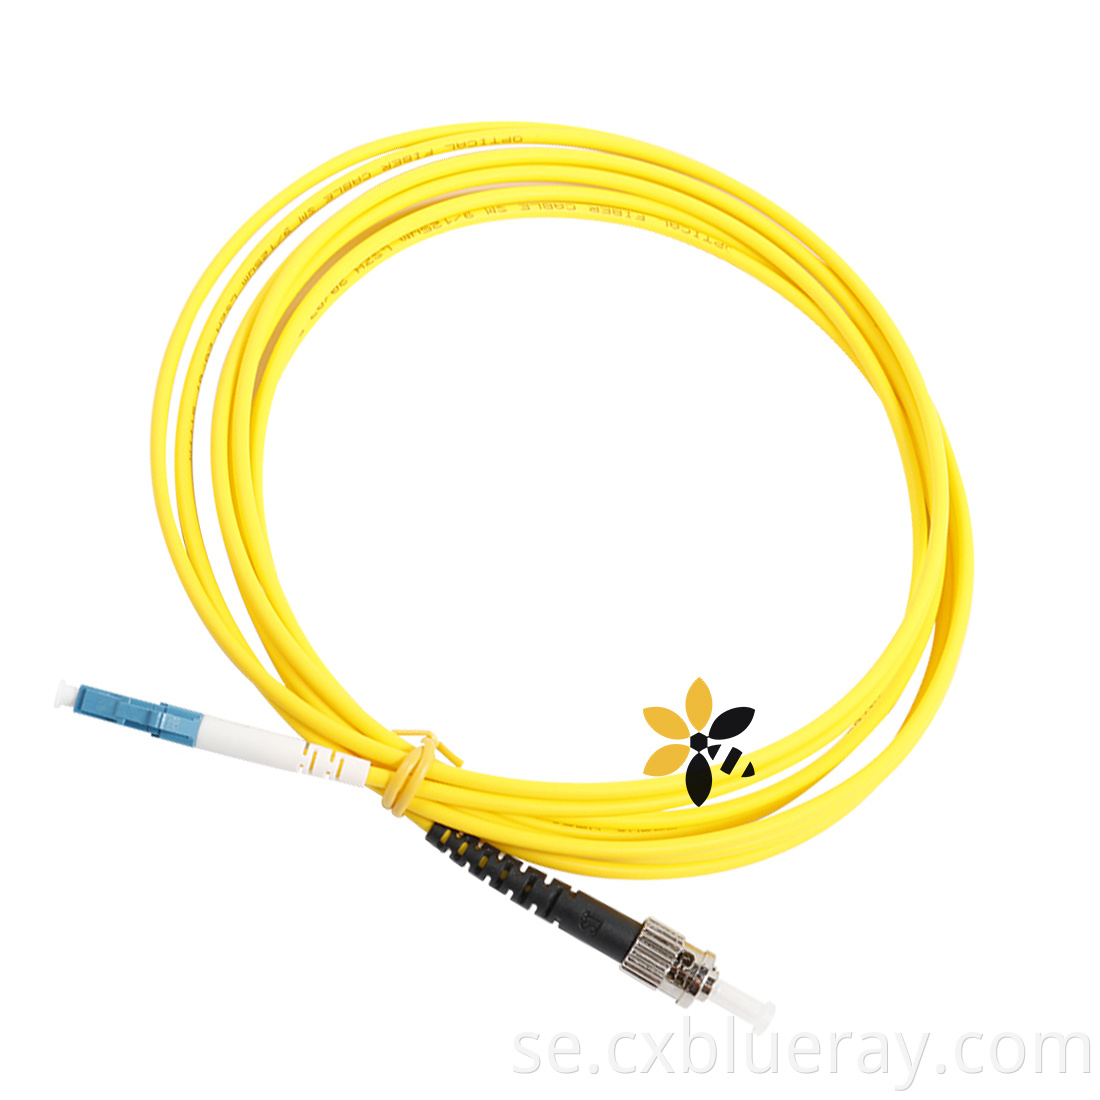 fiber optic patch cord cable